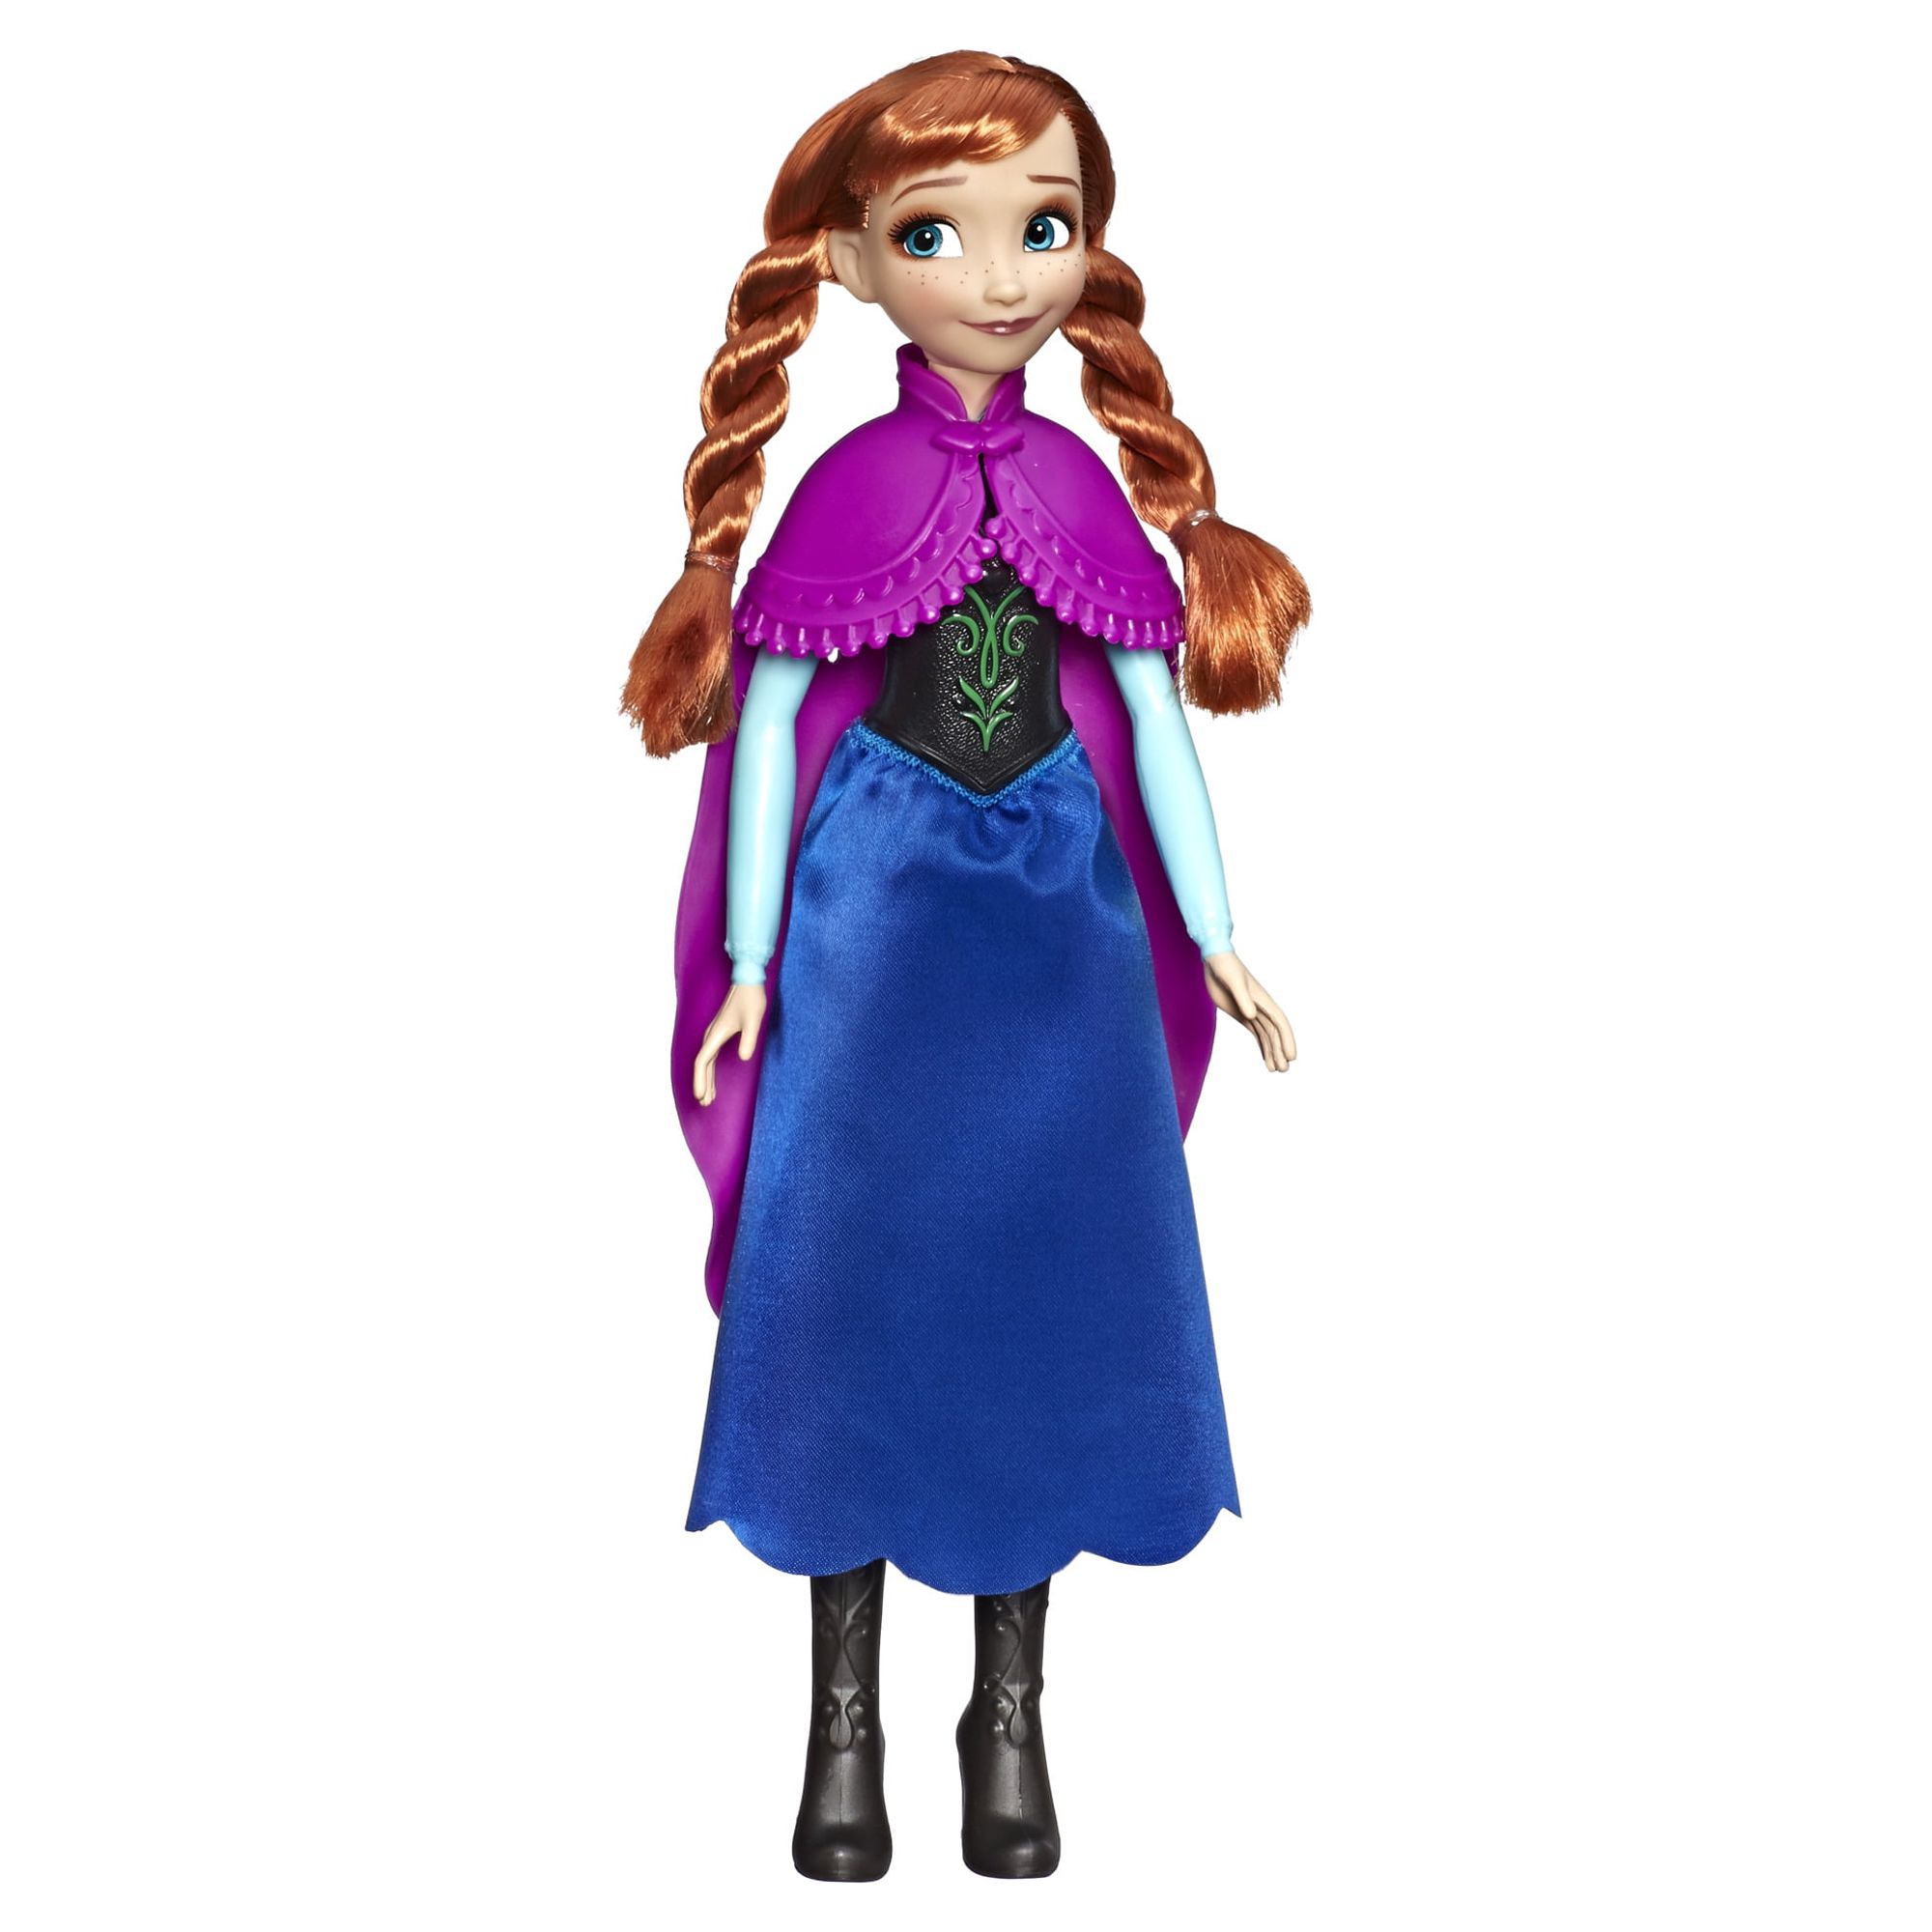 Disney Frozen Anna Fashion Doll with Movie-Inspired Outfit from Frozen - image 1 of 2